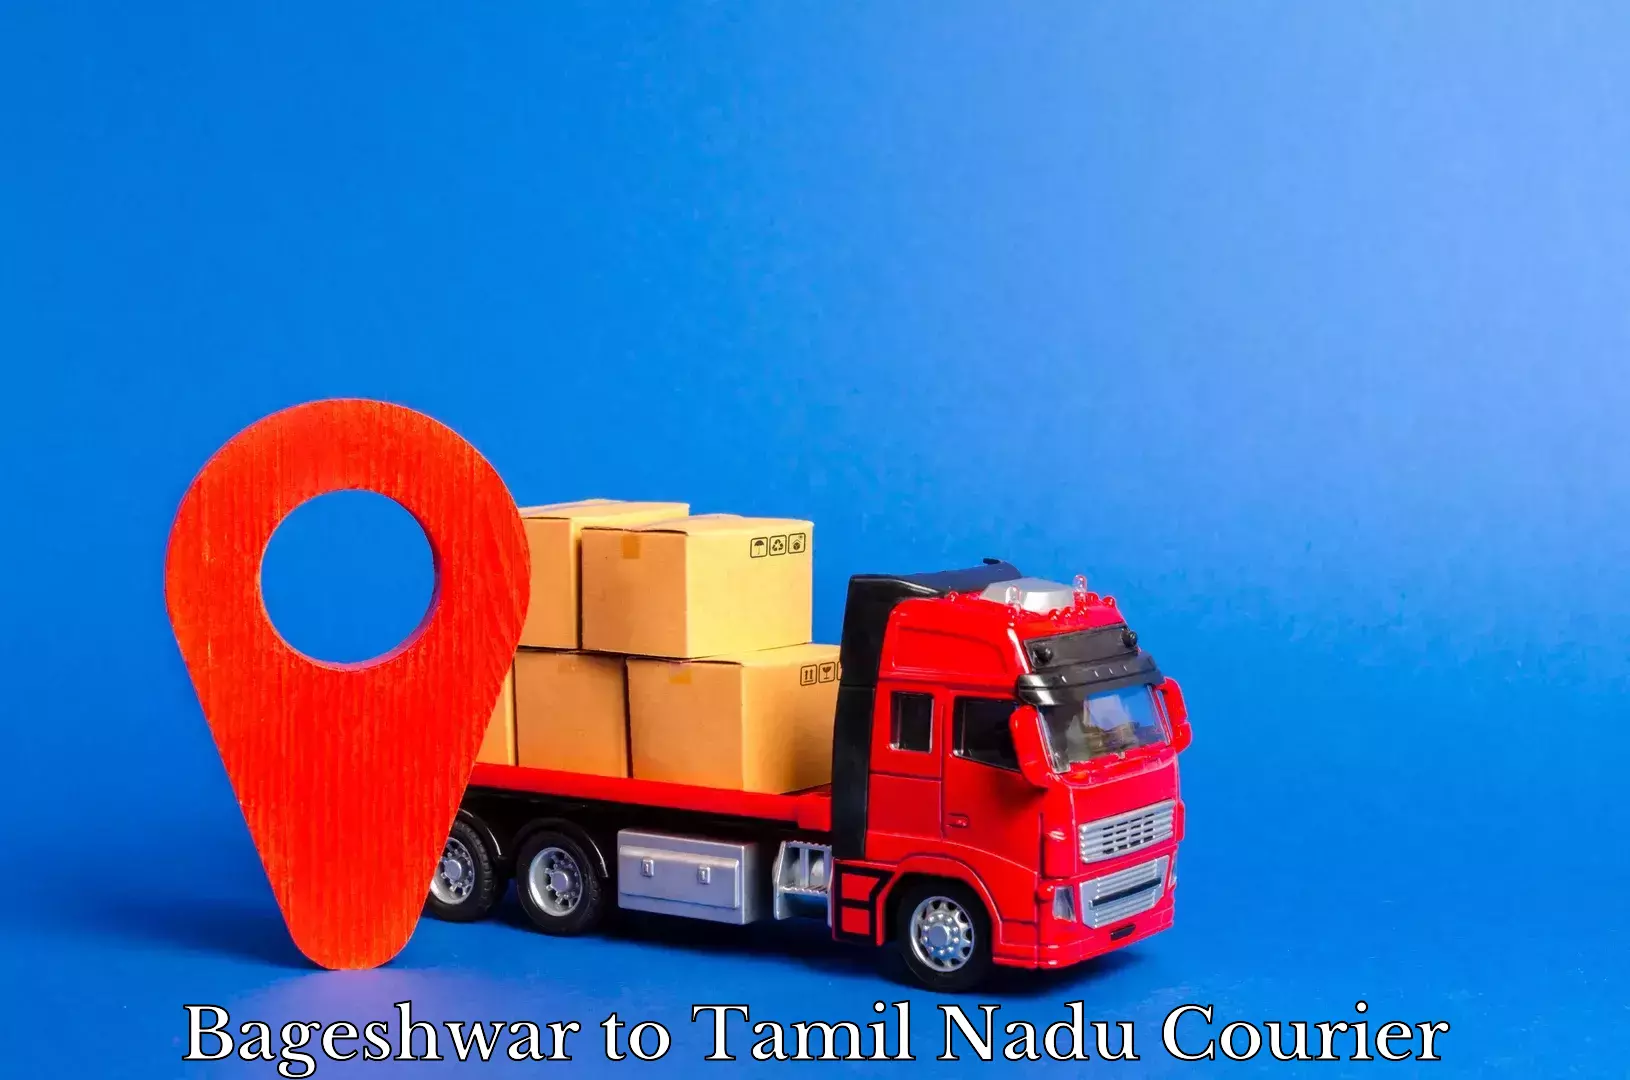 Enhanced tracking features in Bageshwar to Tamil Nadu